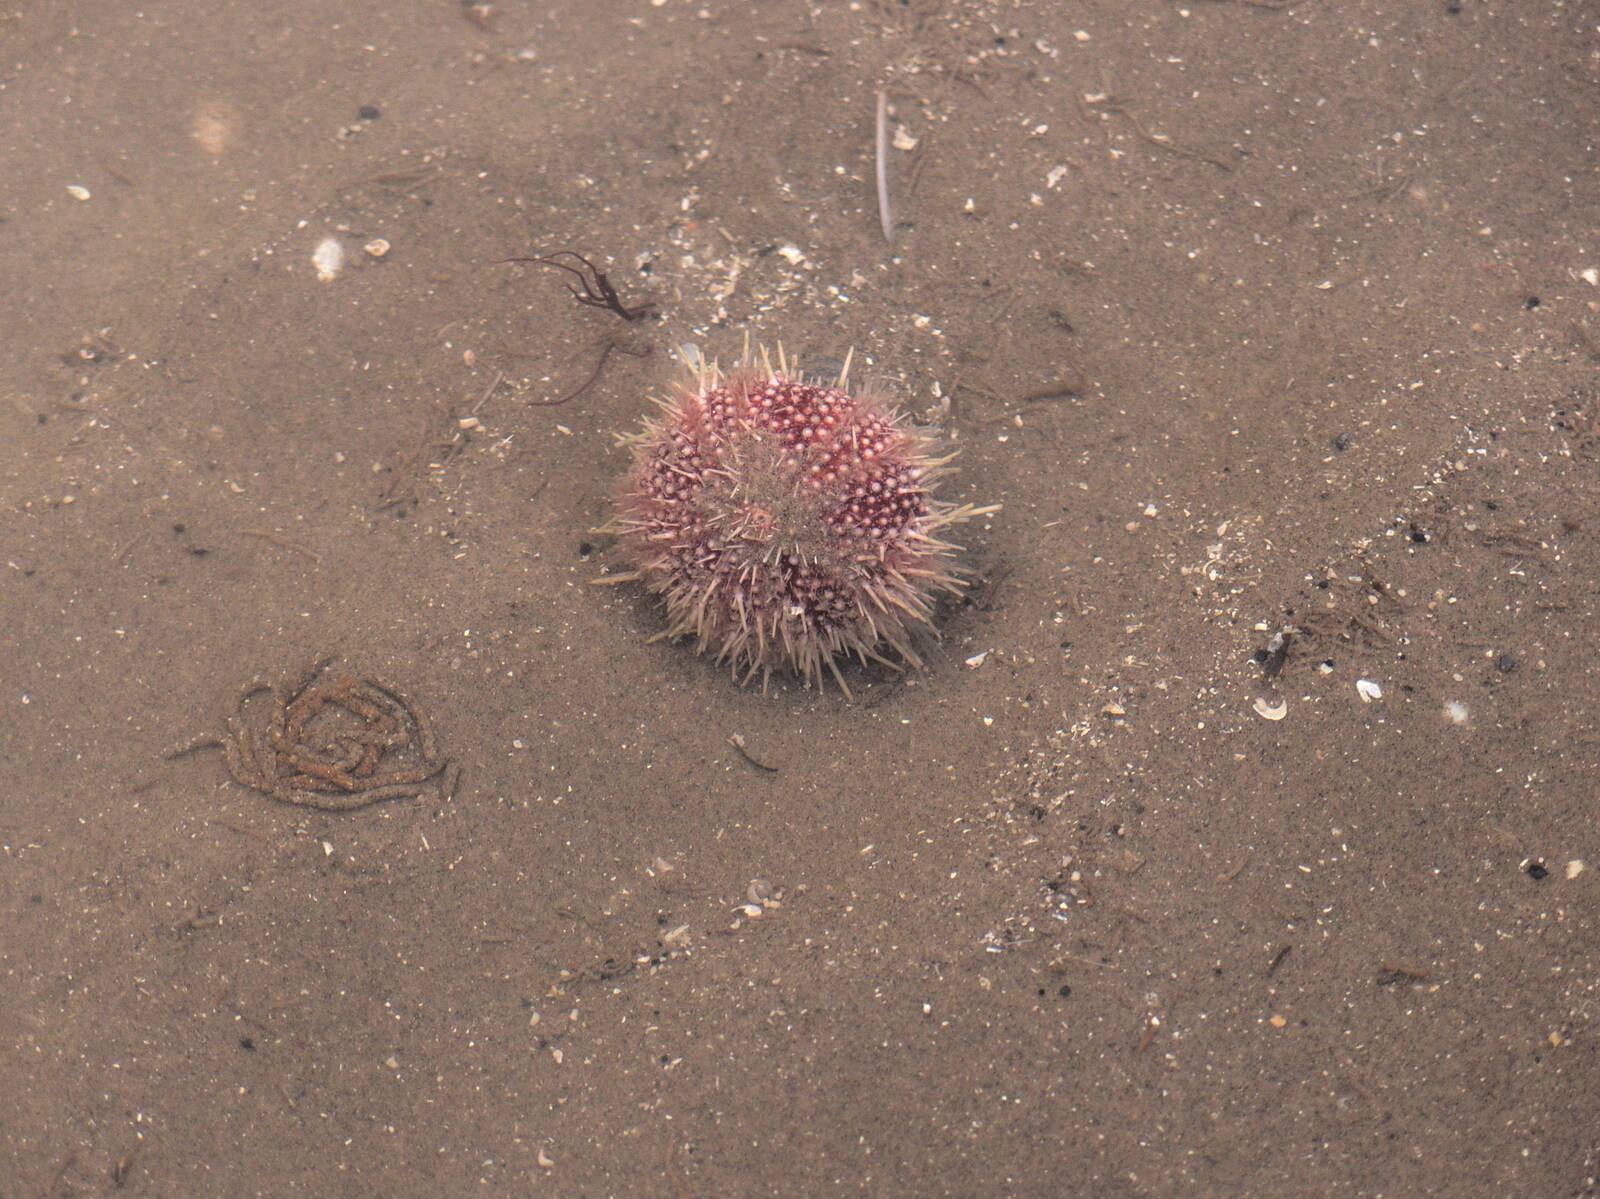 An actual sea urchin rolls around from Christmas Eve in Dublin and Blackrock, Ireland - 24th December 2015